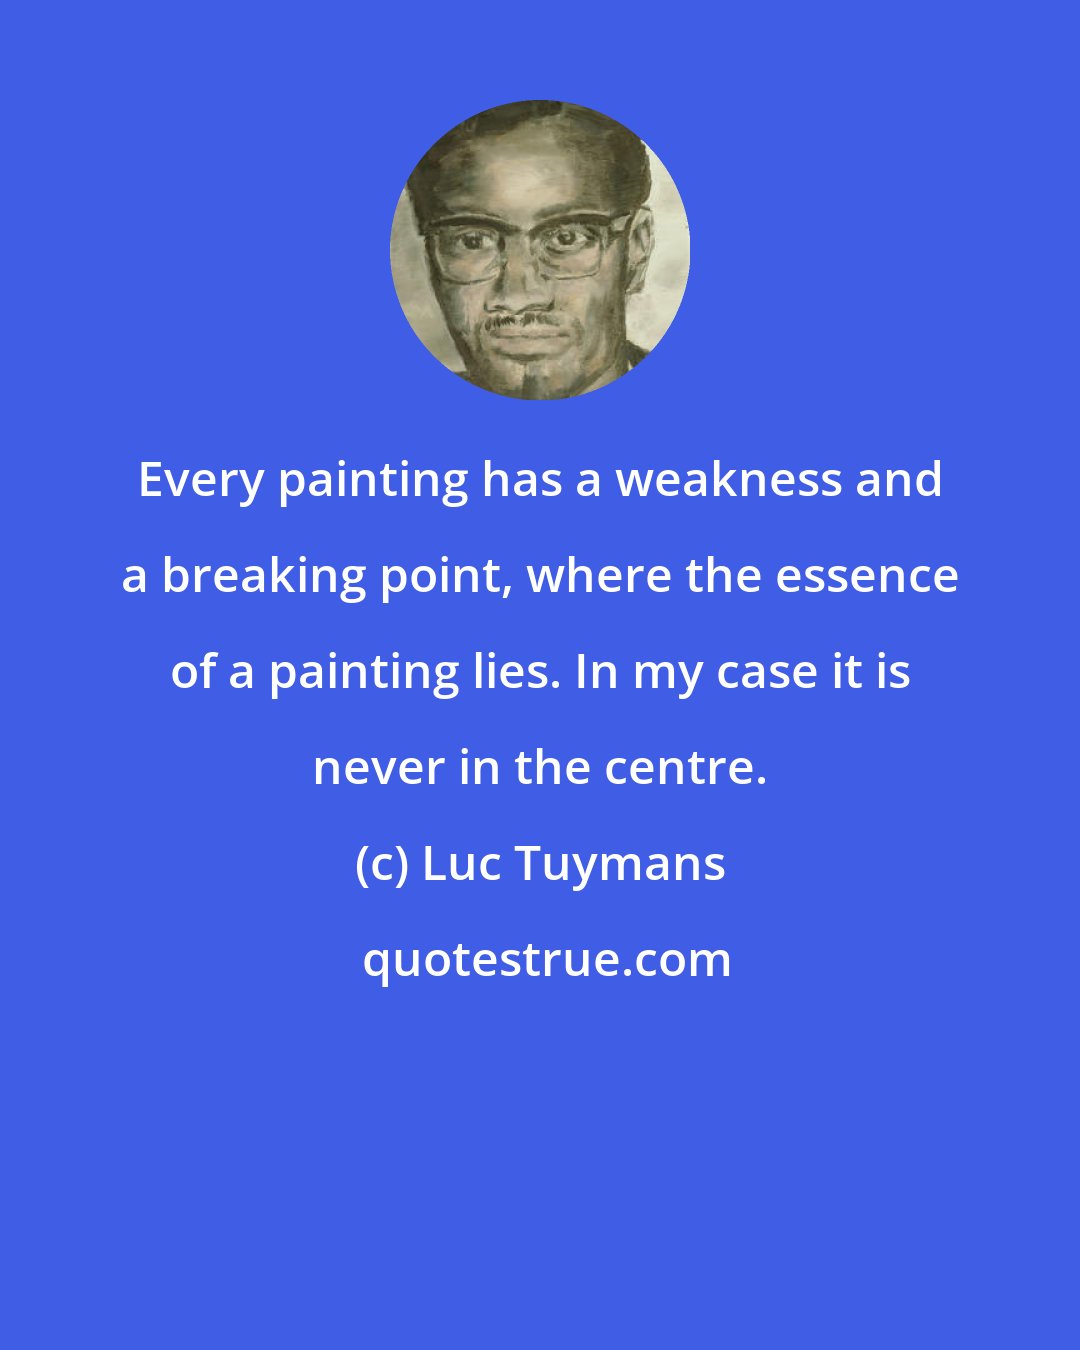 Luc Tuymans: Every painting has a weakness and a breaking point, where the essence of a painting lies. In my case it is never in the centre.